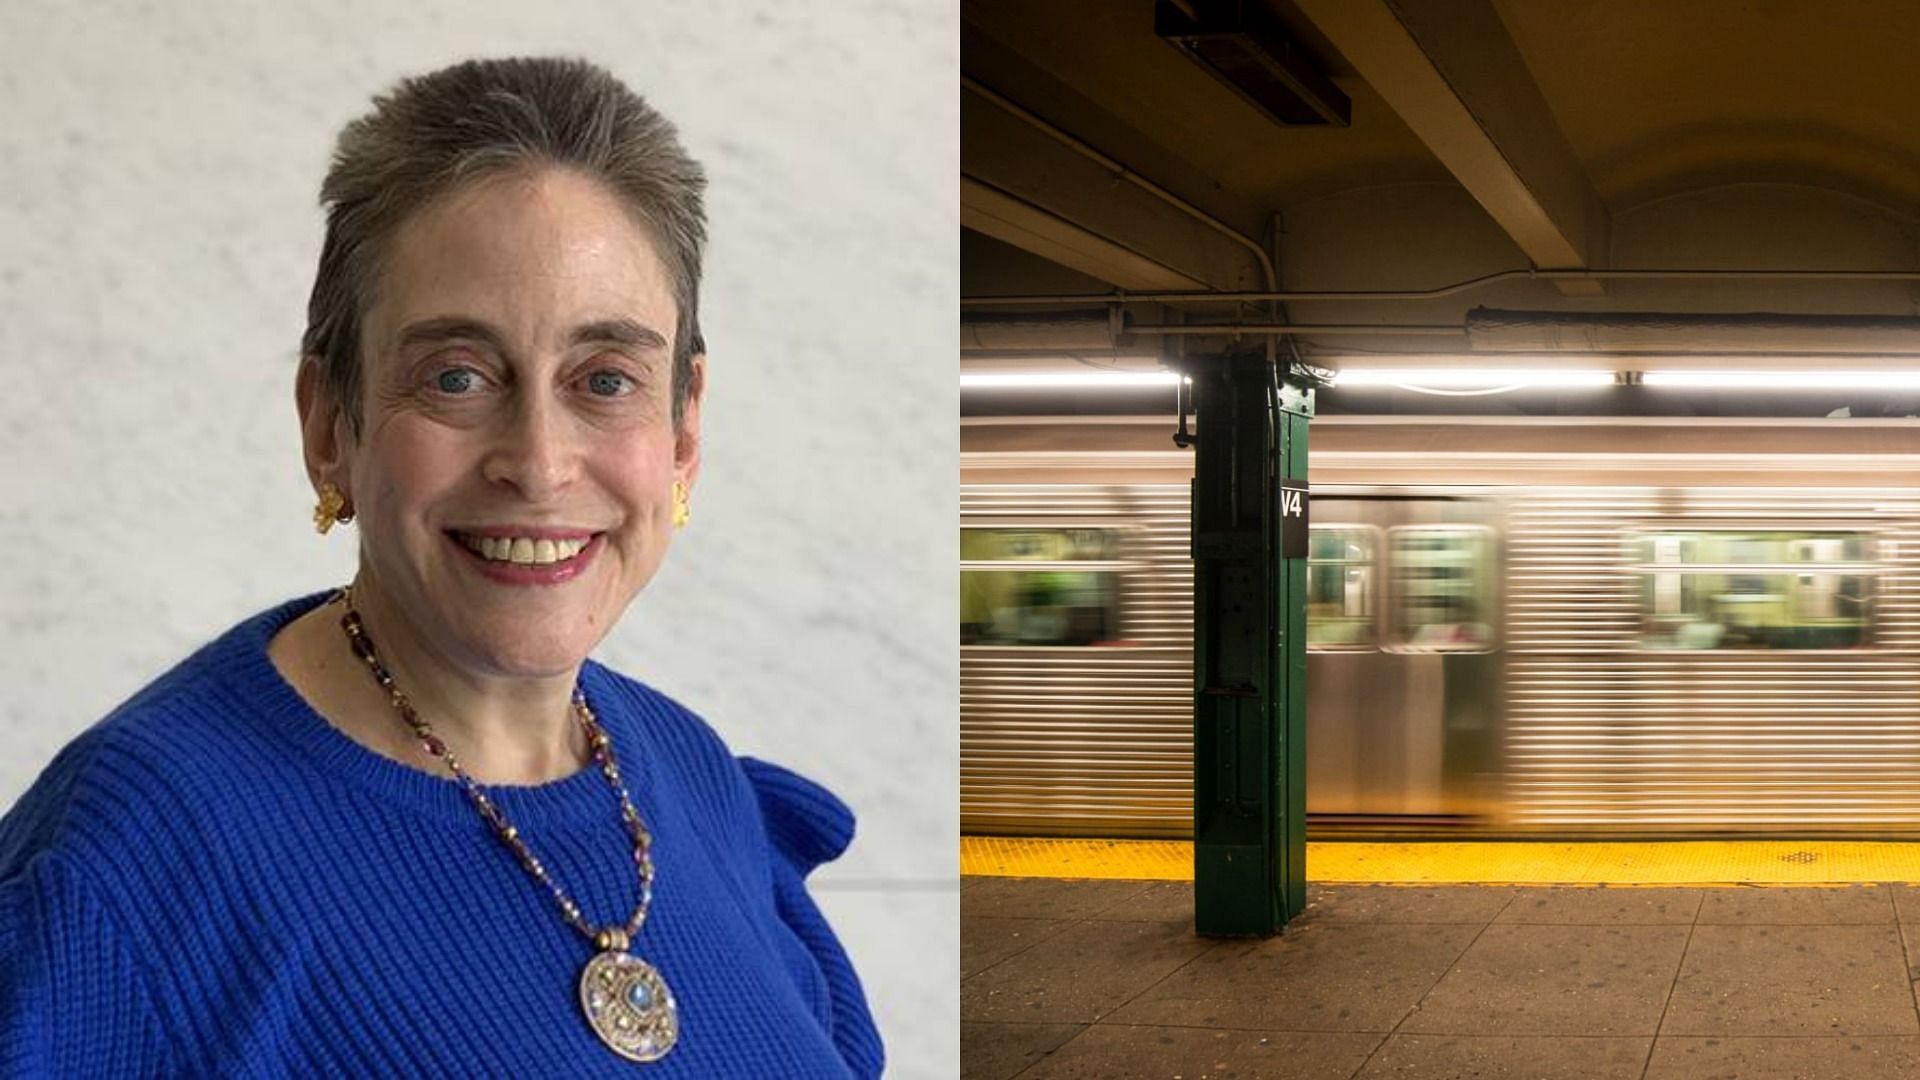 Department of Health&#039;s Nina Rothschild was attacked by a robber in Queens Plaza subway (Image via Columbia University and Getty Images)